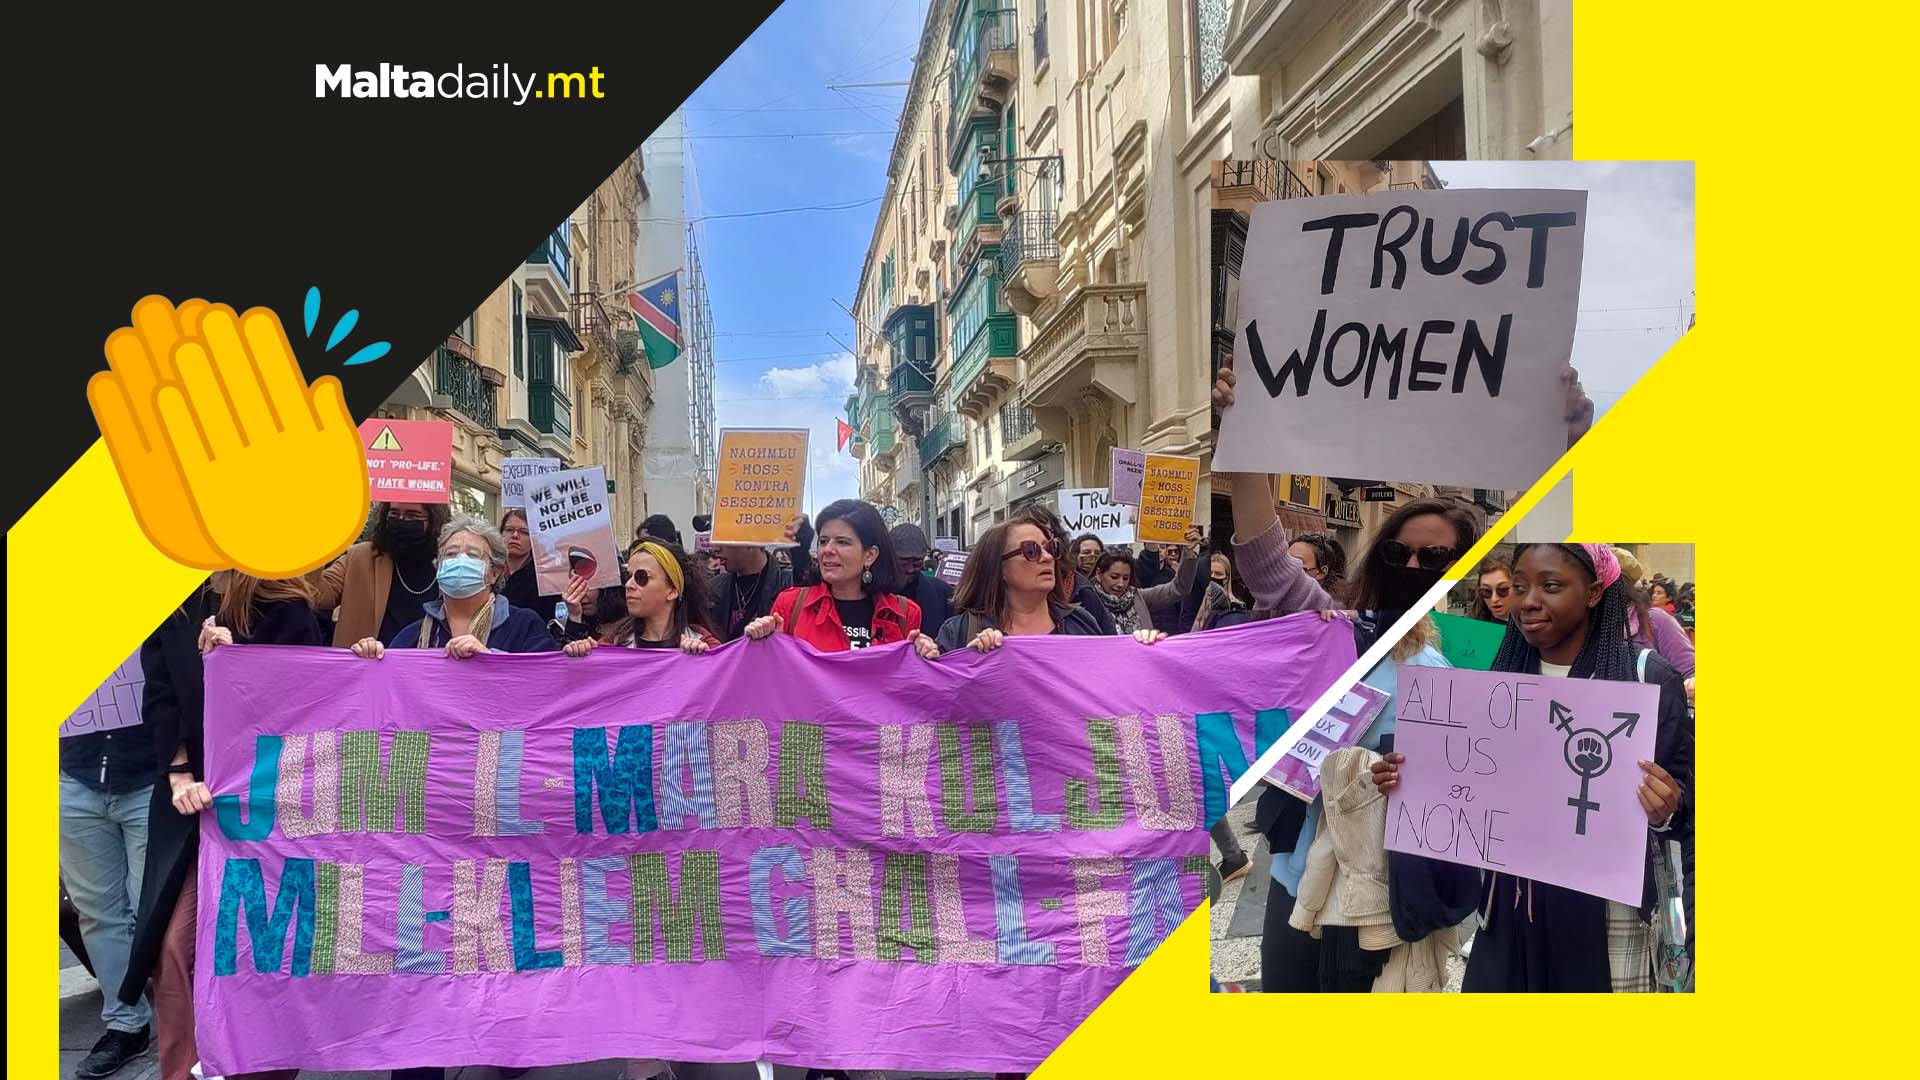 Woman’s day everyday: hundreds demonstrate for women’s rights